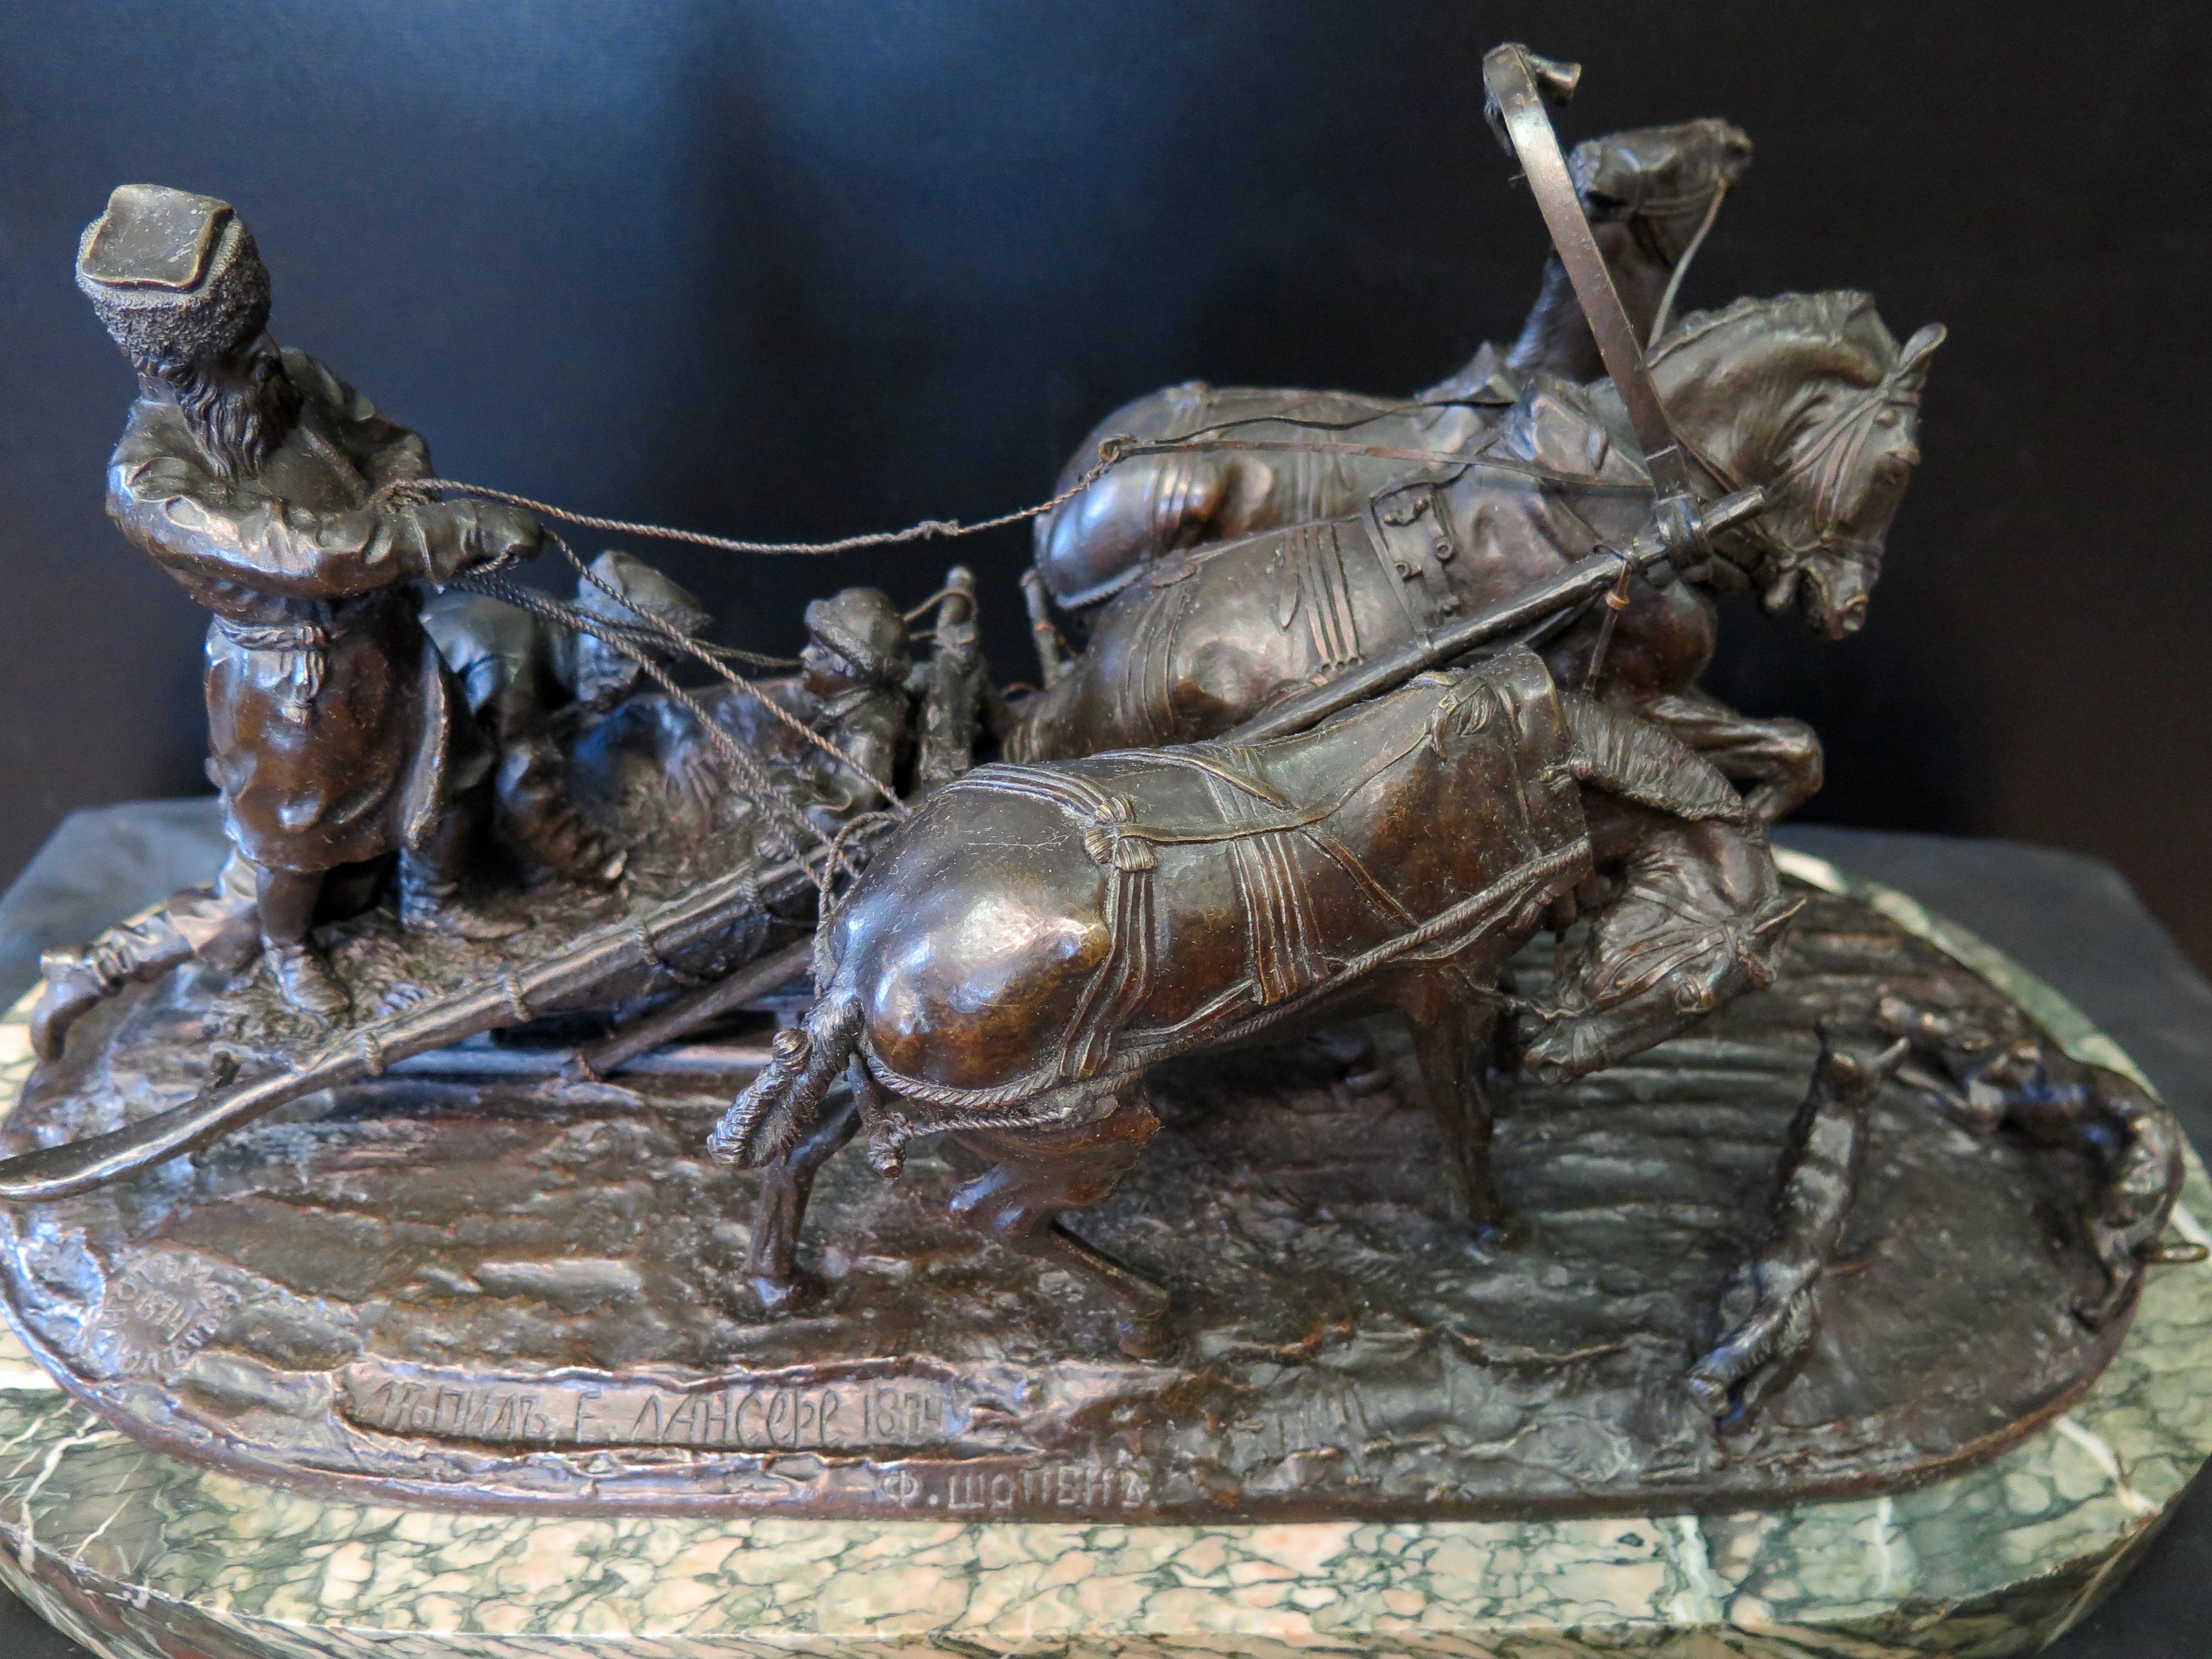 This vintage late 19th century Russian bronze, Troika, is created by Yeogeny Nickolayervich Lanceray.  The richly patinated bronze sculpture identifies three harnessed horses pulling a snow sled with three passengers. The bronze sculpture is